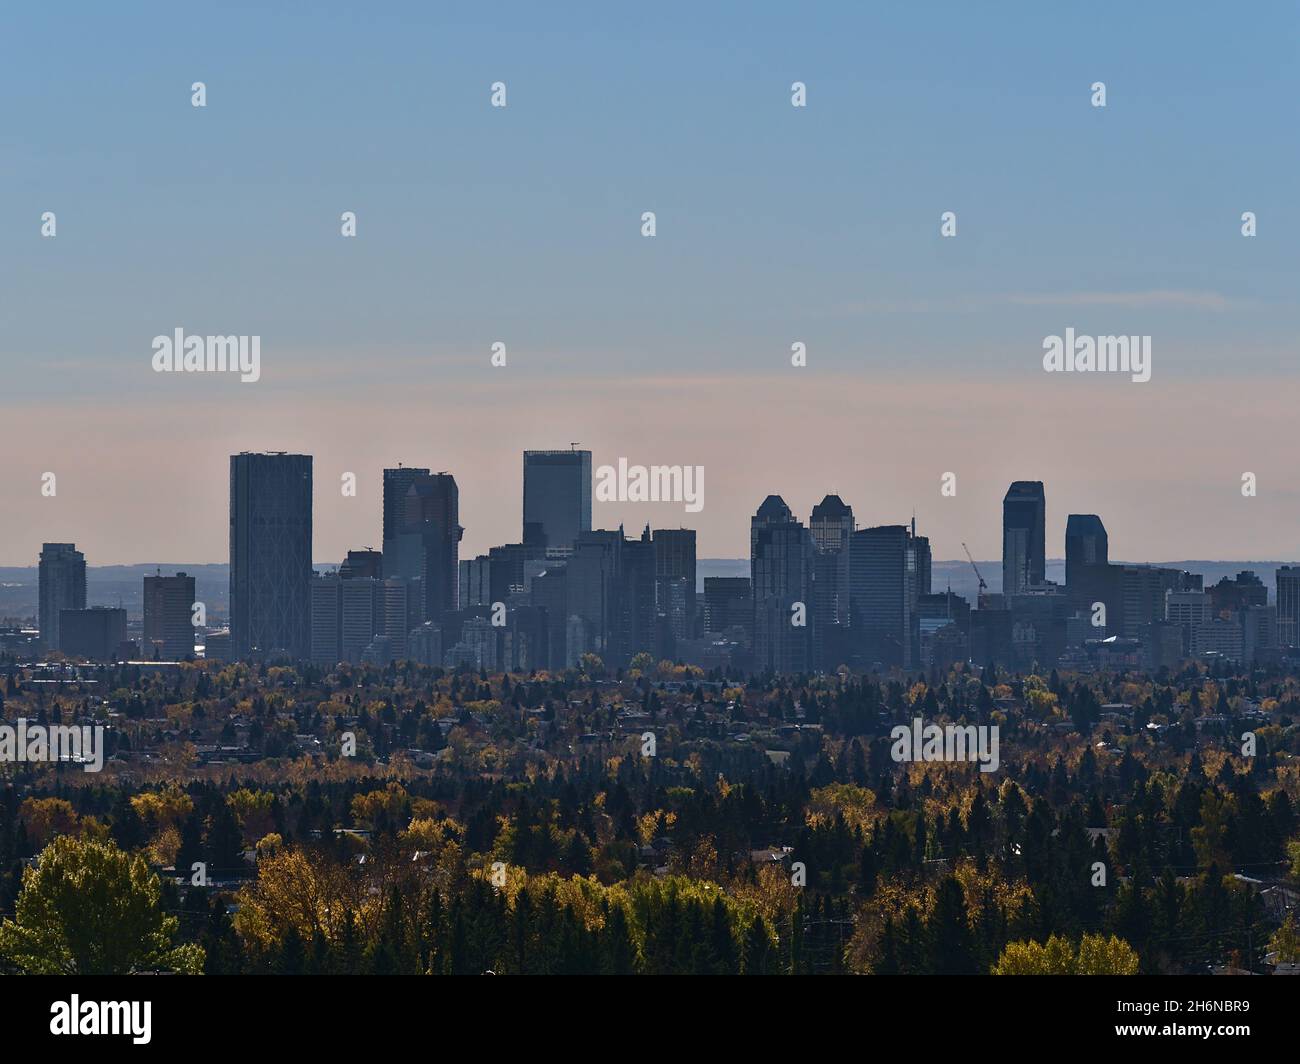 View of the skyline of Calgary, Alberta, Canada in autumn season with modern skyscrapers and colorful trees in front viewed from Nose Hill Park. Stock Photo